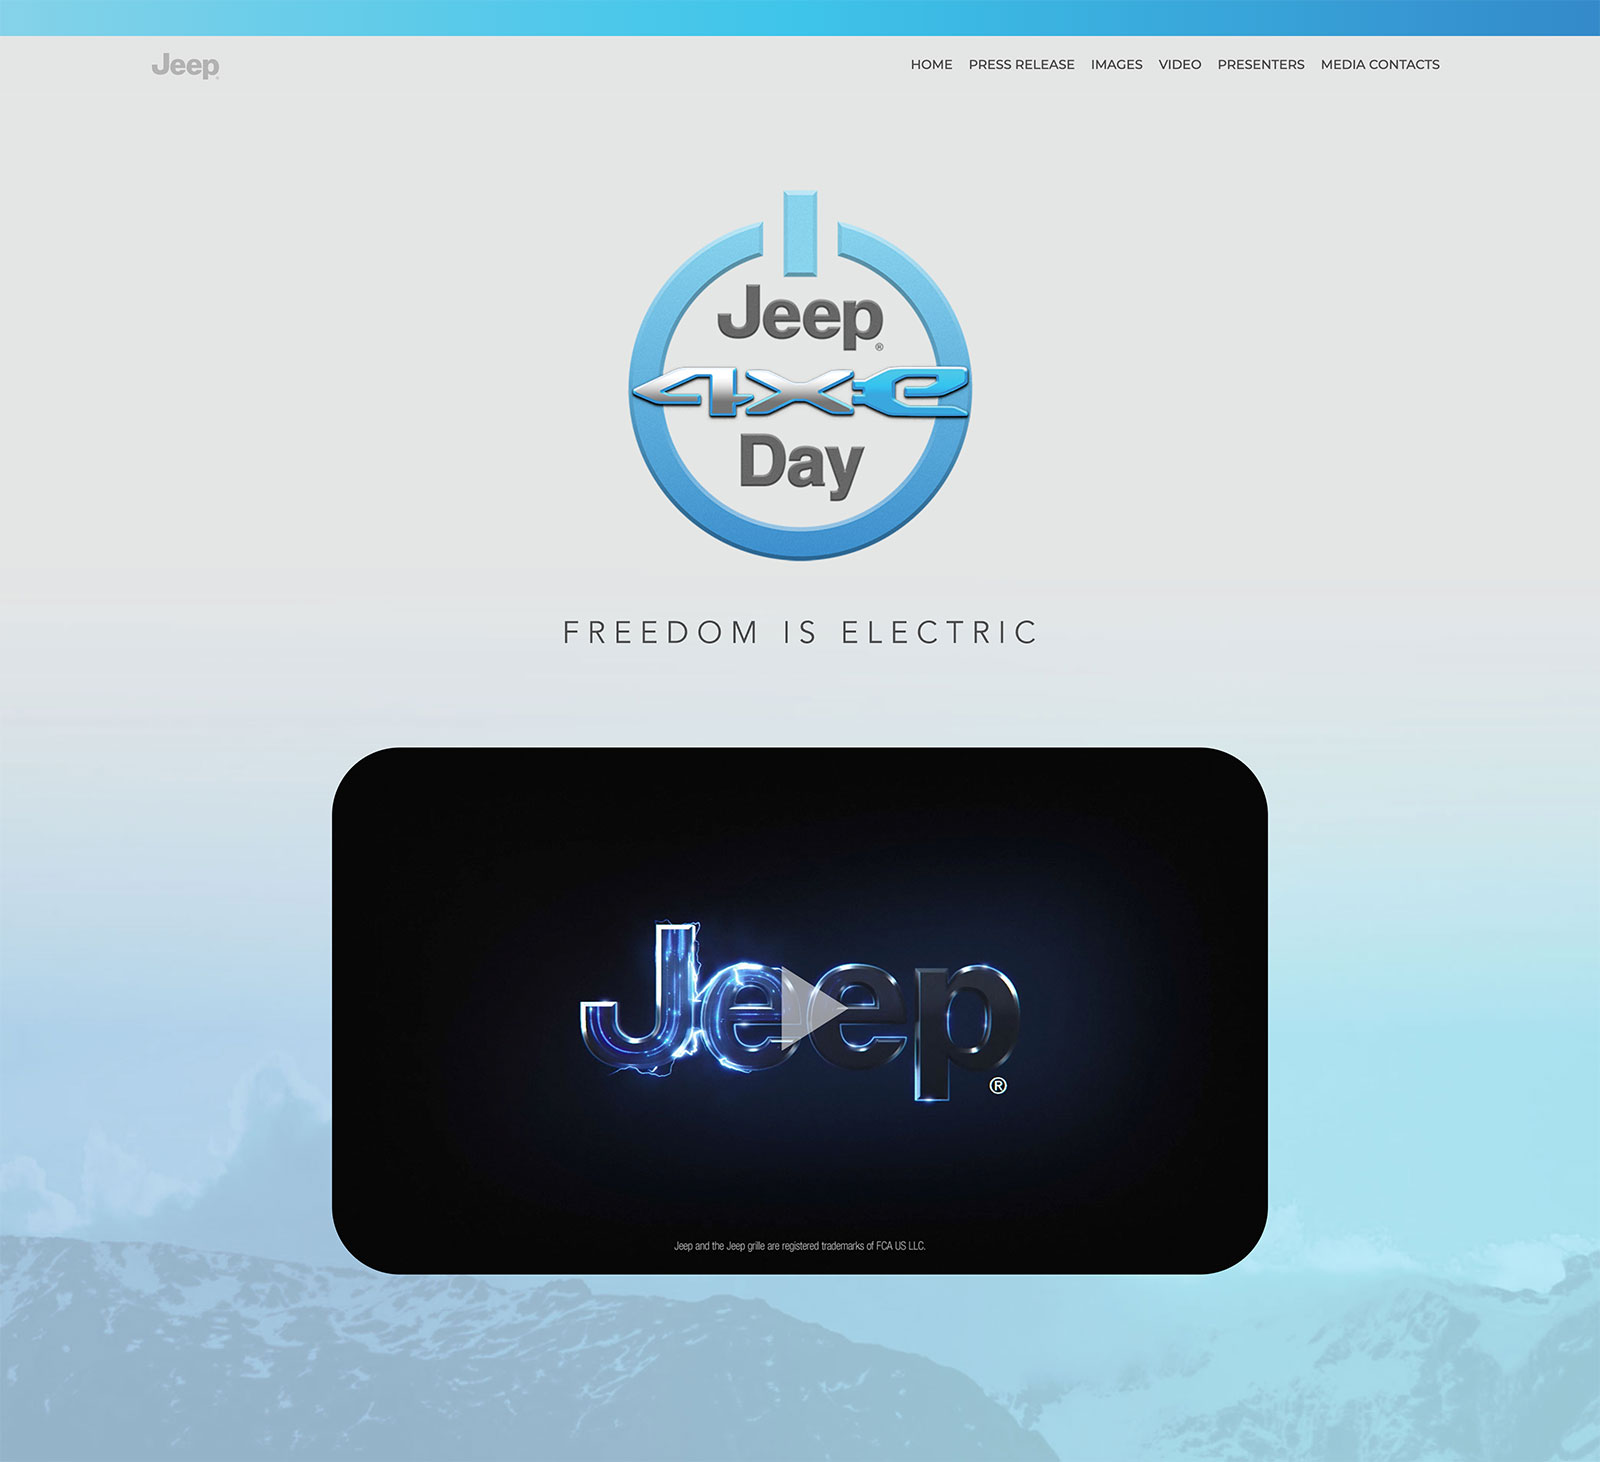 Jeep 4xe Day Home screen.